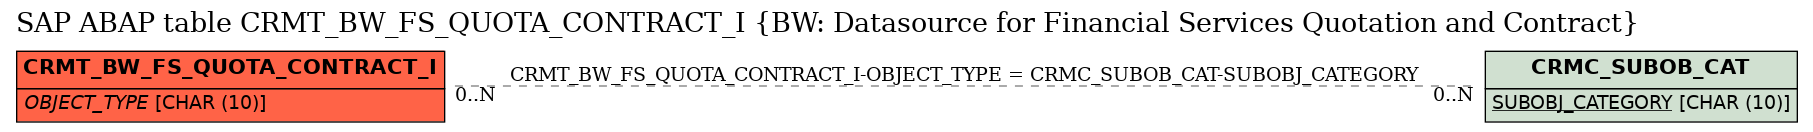 E-R Diagram for table CRMT_BW_FS_QUOTA_CONTRACT_I (BW: Datasource for Financial Services Quotation and Contract)